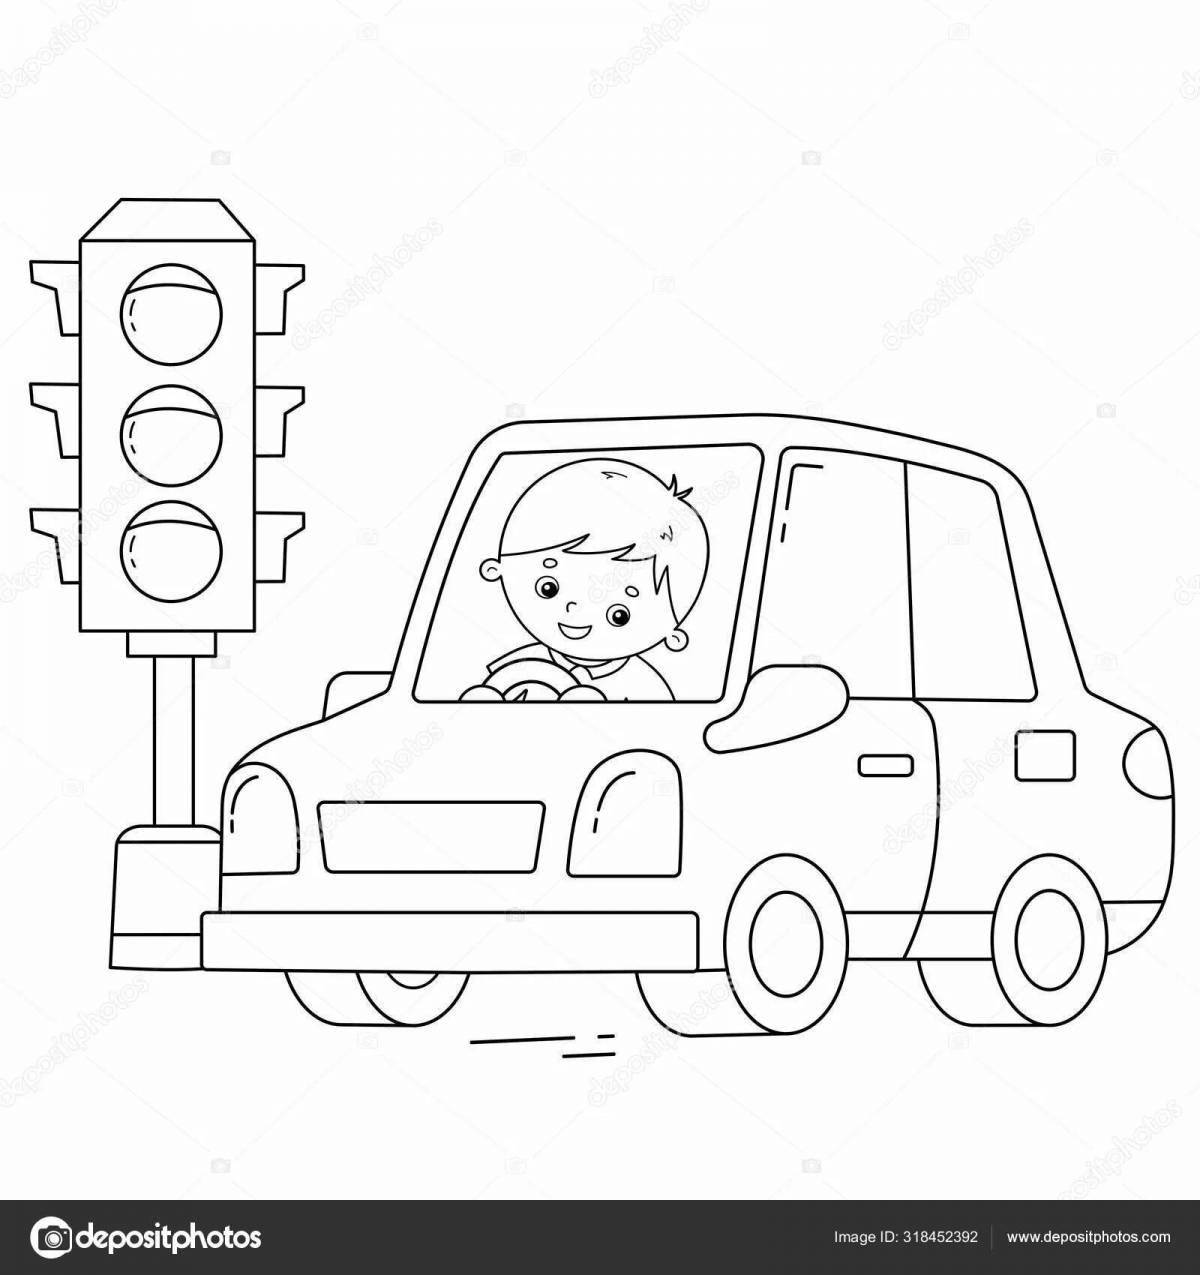 According to traffic rules for preschoolers preparatory group #14